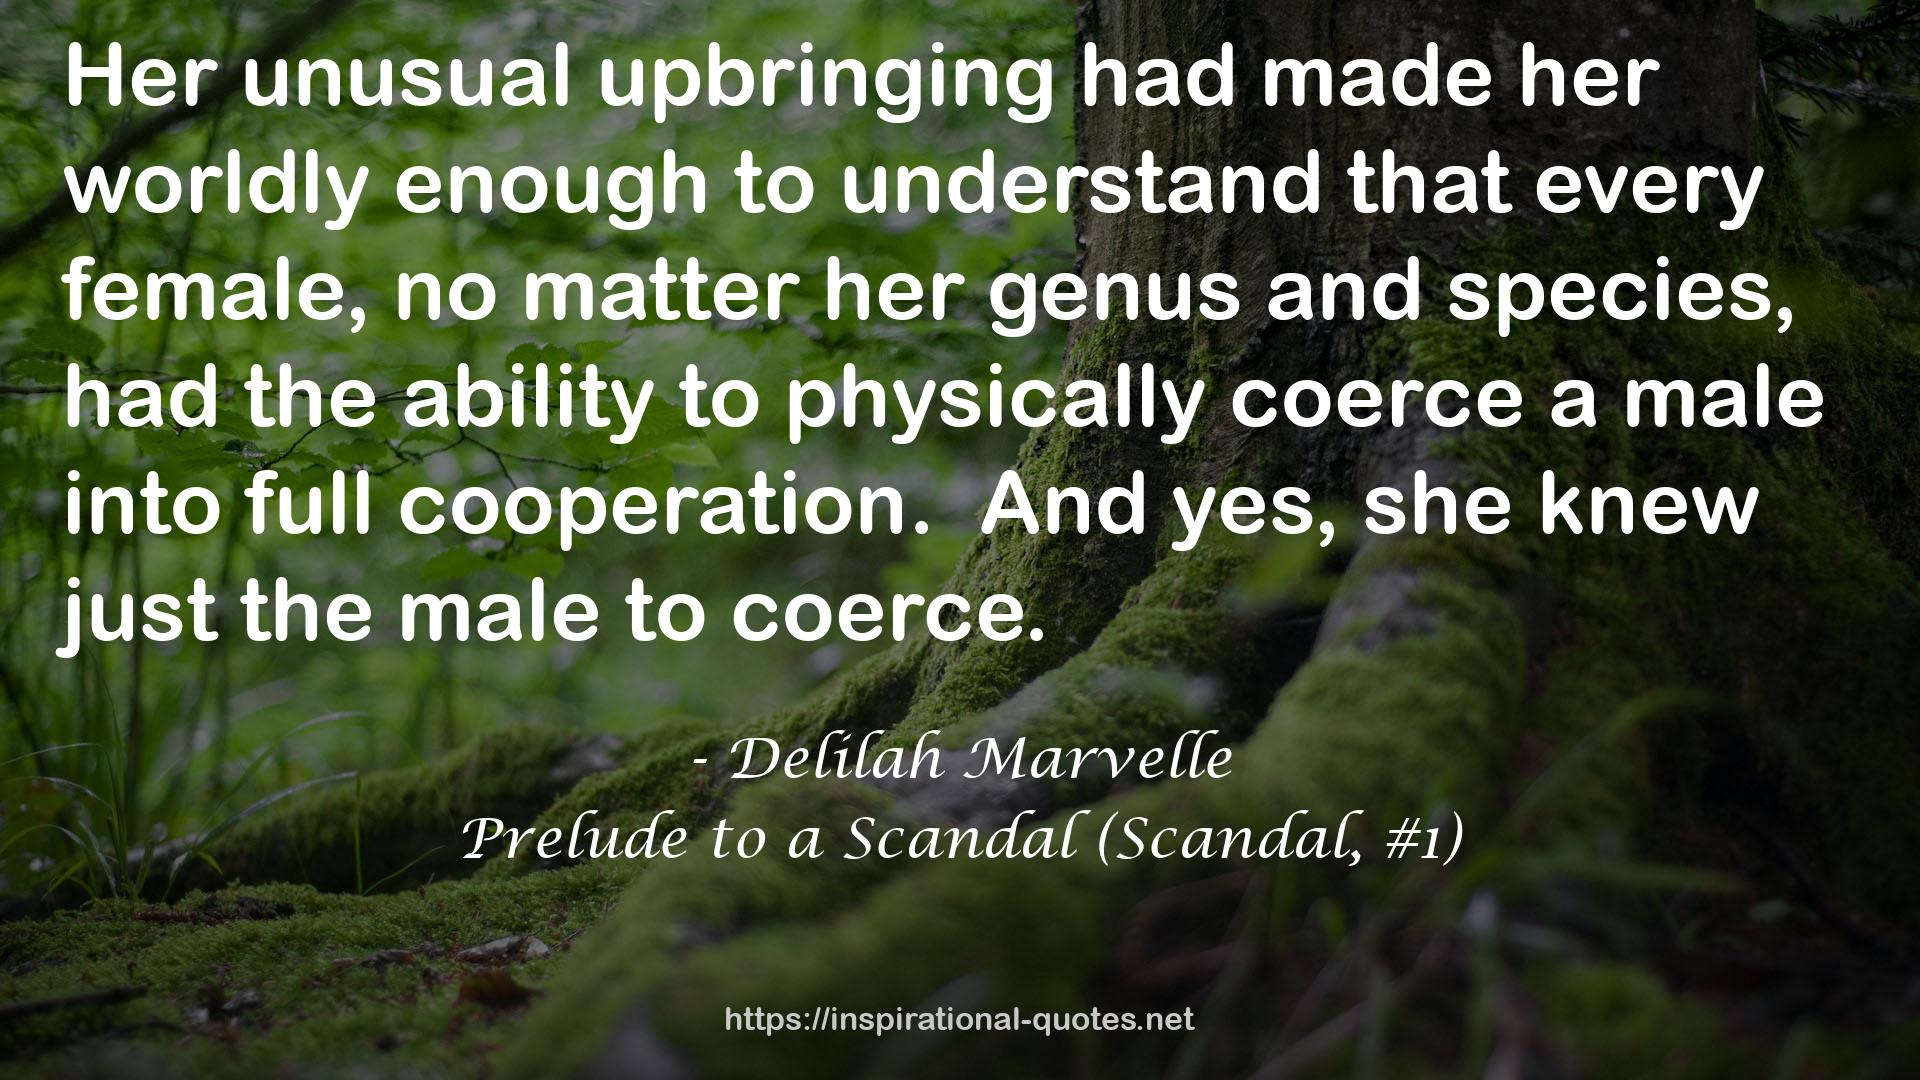 Prelude to a Scandal (Scandal, #1) QUOTES